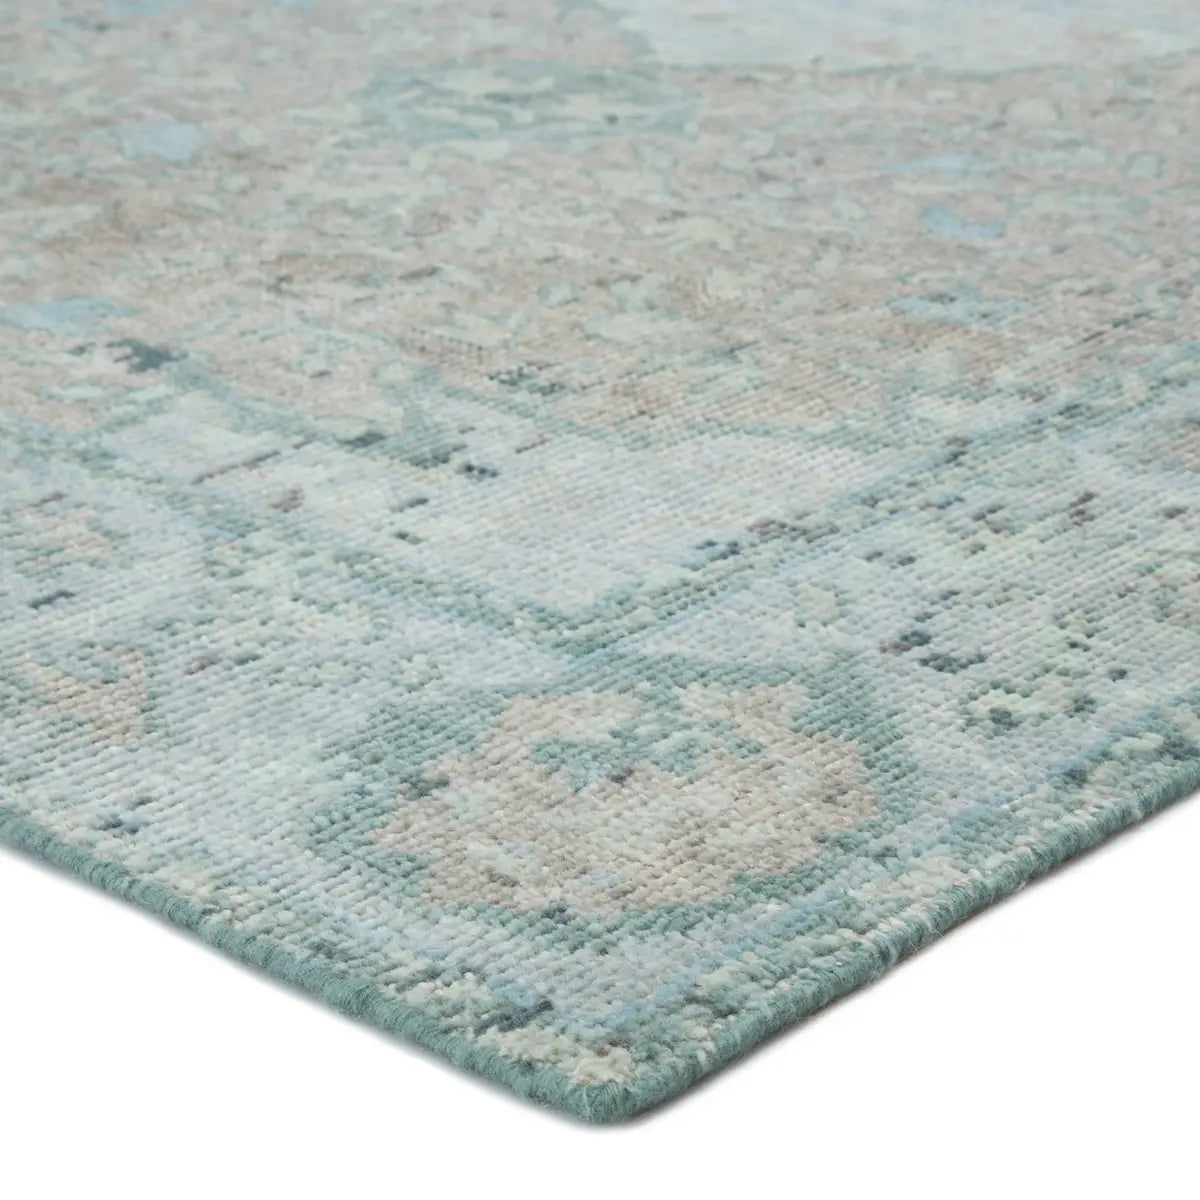 Exceptionally made and artfully designed, this hand-knotted area rug infuses contemporary homes with vintage allure. An on-trend colorway of vibrant aqua, beige, and dark gray lends a fresh update to the floral and medallion design, while a patina-rich antiqued effect creates a timeless look. Amethyst Home provides interior design services, furniture, rugs, and lighting in the Omaha metro area.